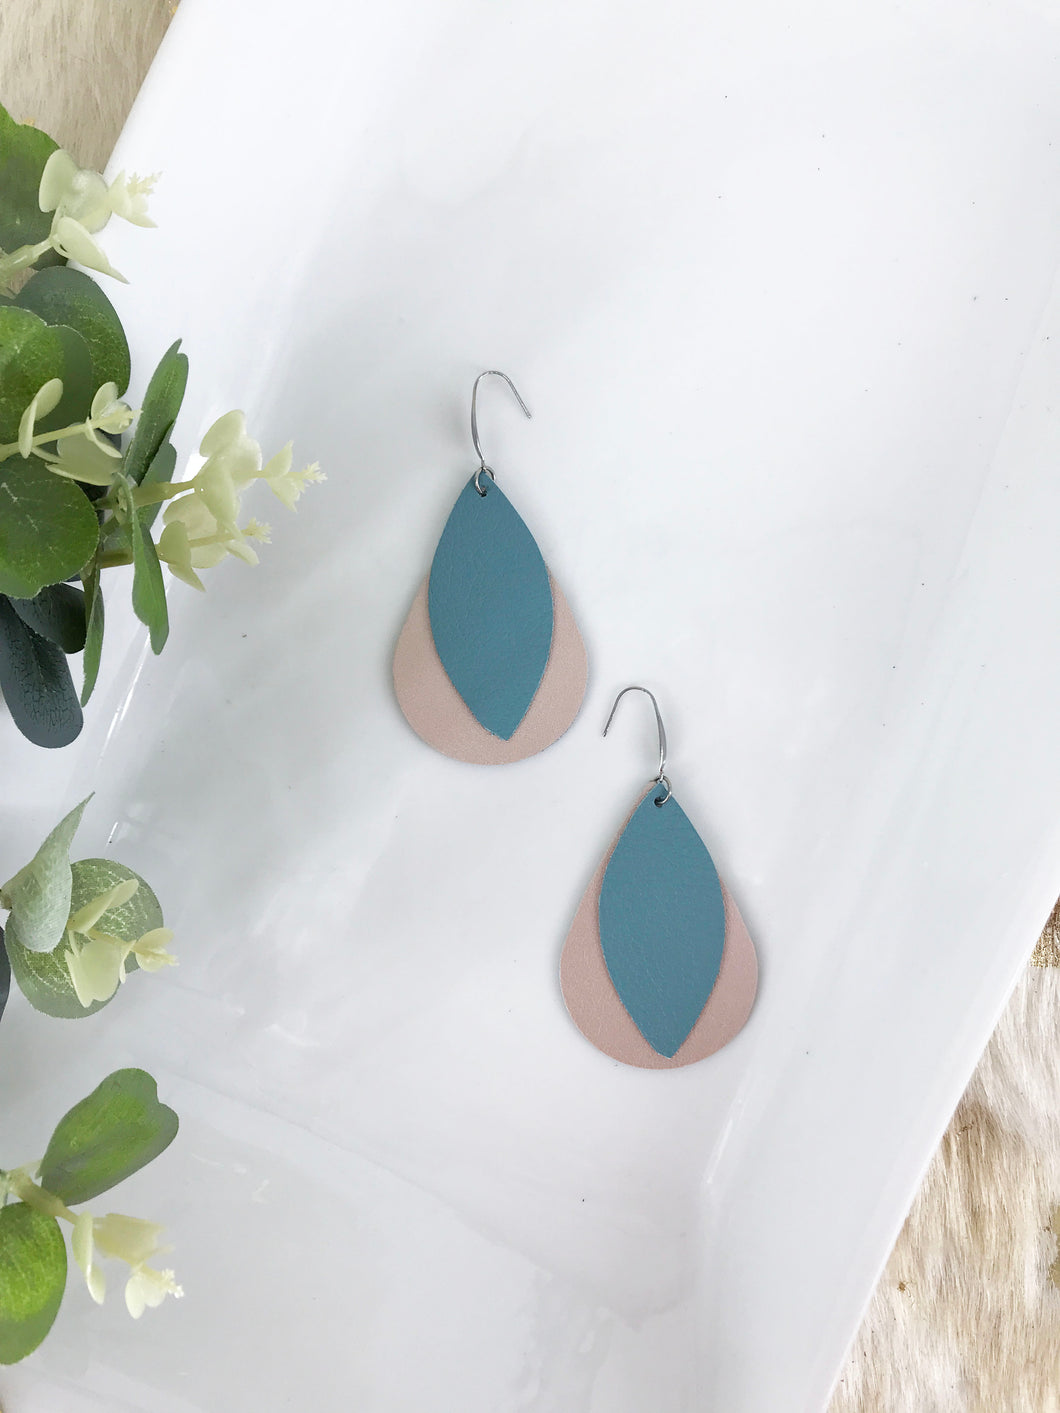 Rose Gold and Peacock Blue Leather Earrings - E19-1477